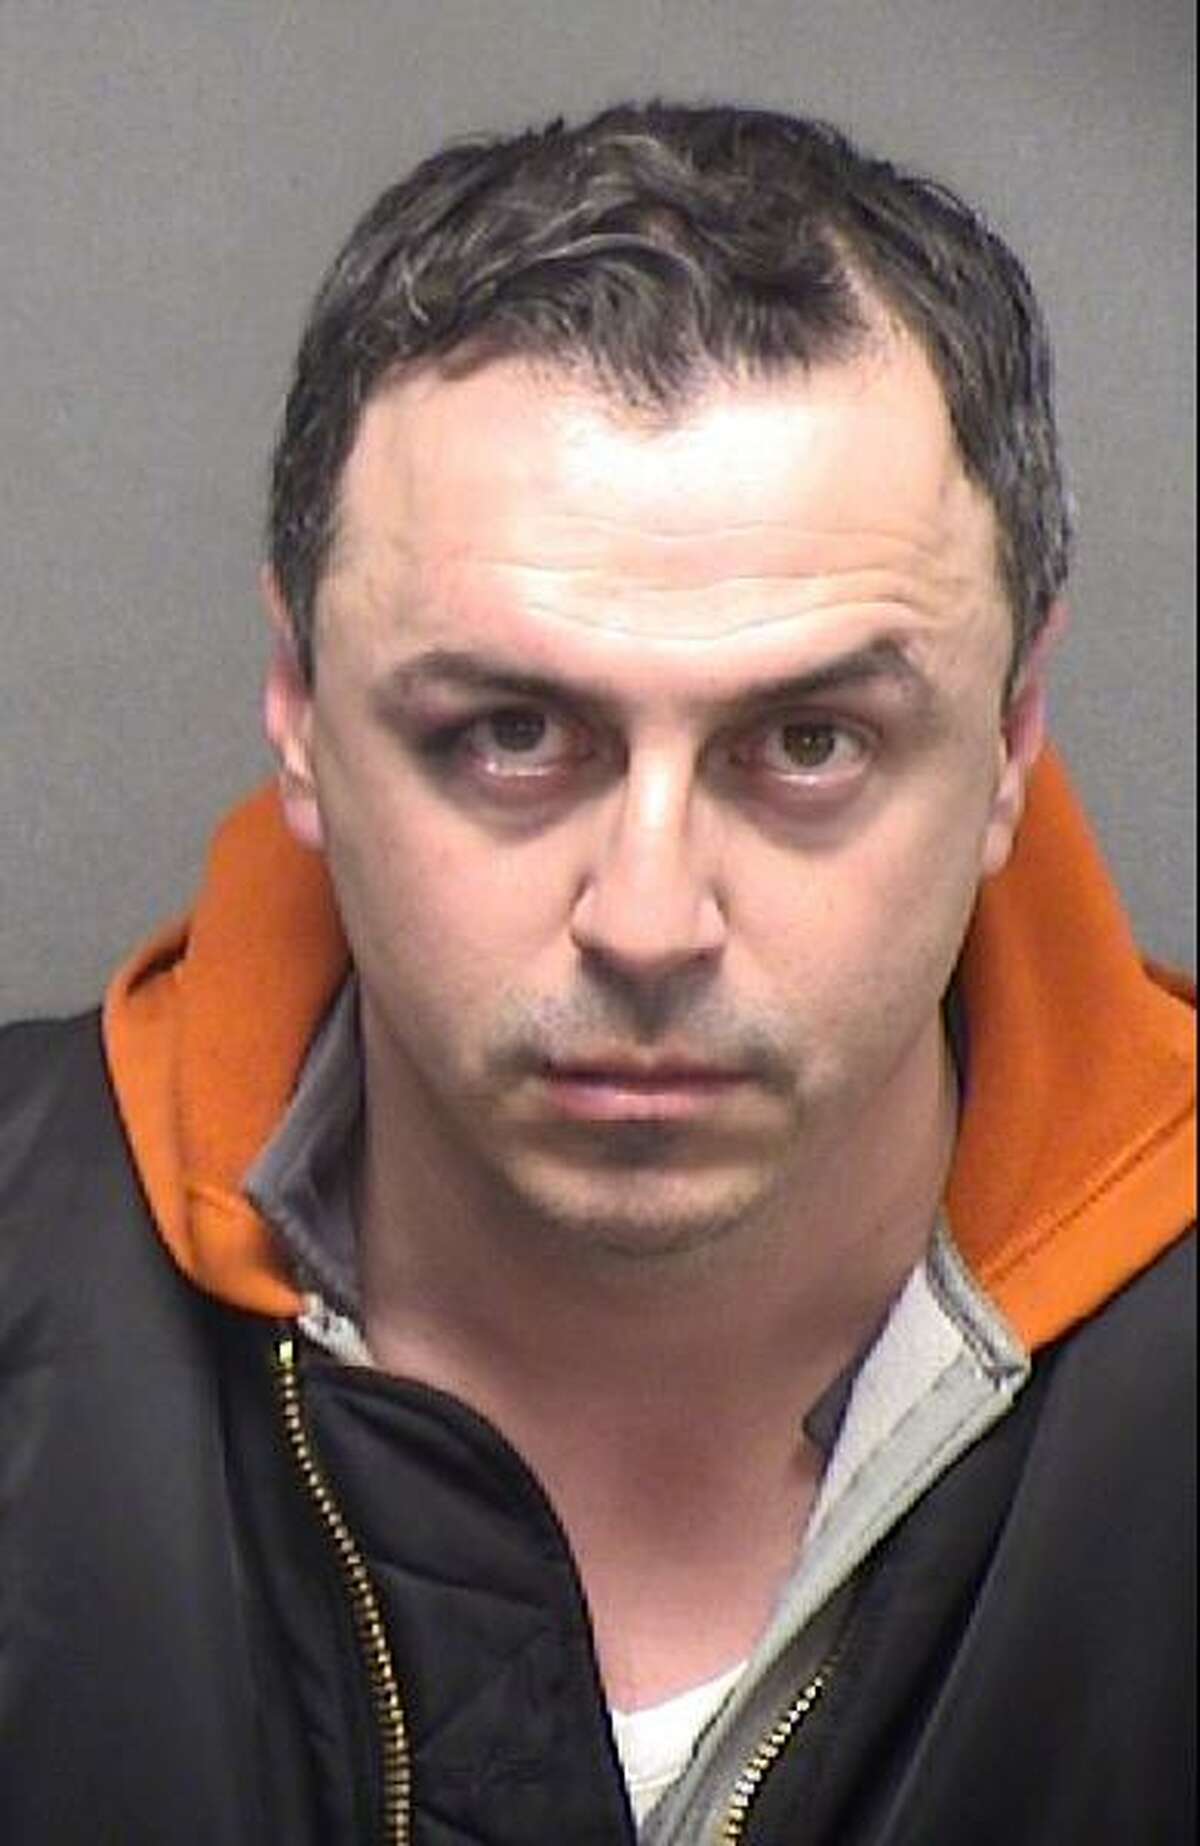 Steven Christopher Solis — a co-host of KABB’s “Daytime with Kimberly and Esteban” — was arrested Friday on suspicion of driving while intoxicated.